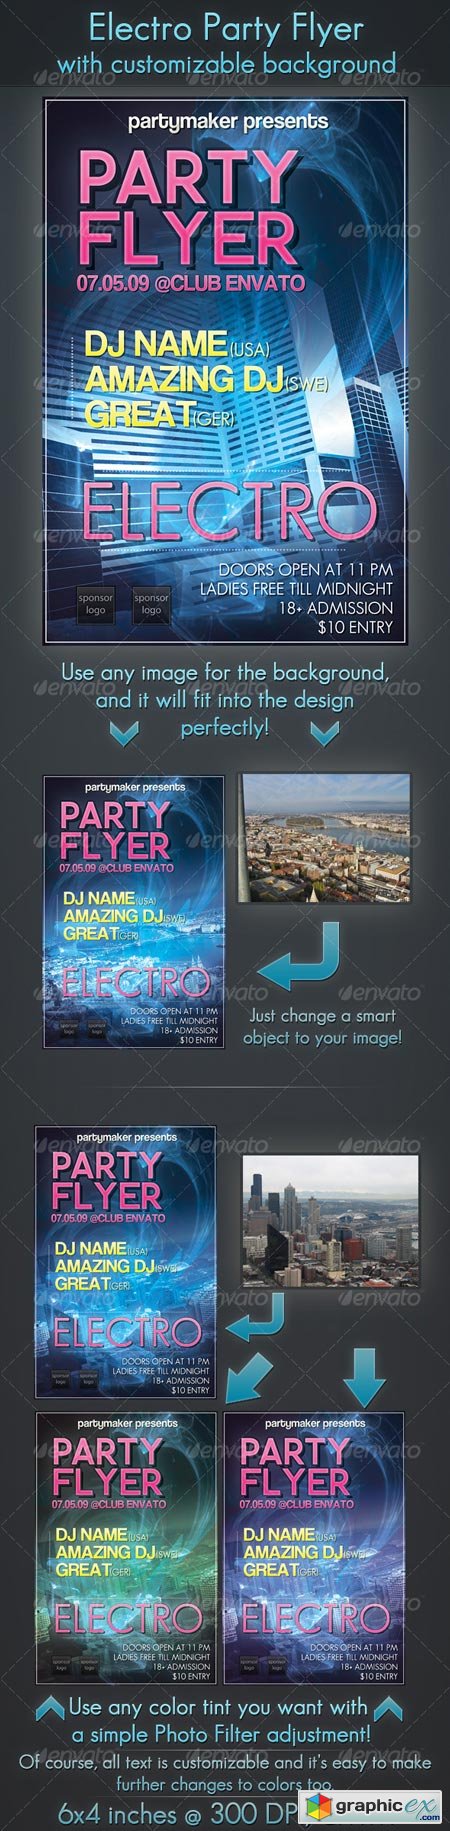 Electro Party Flyer with Customizable Background 125856